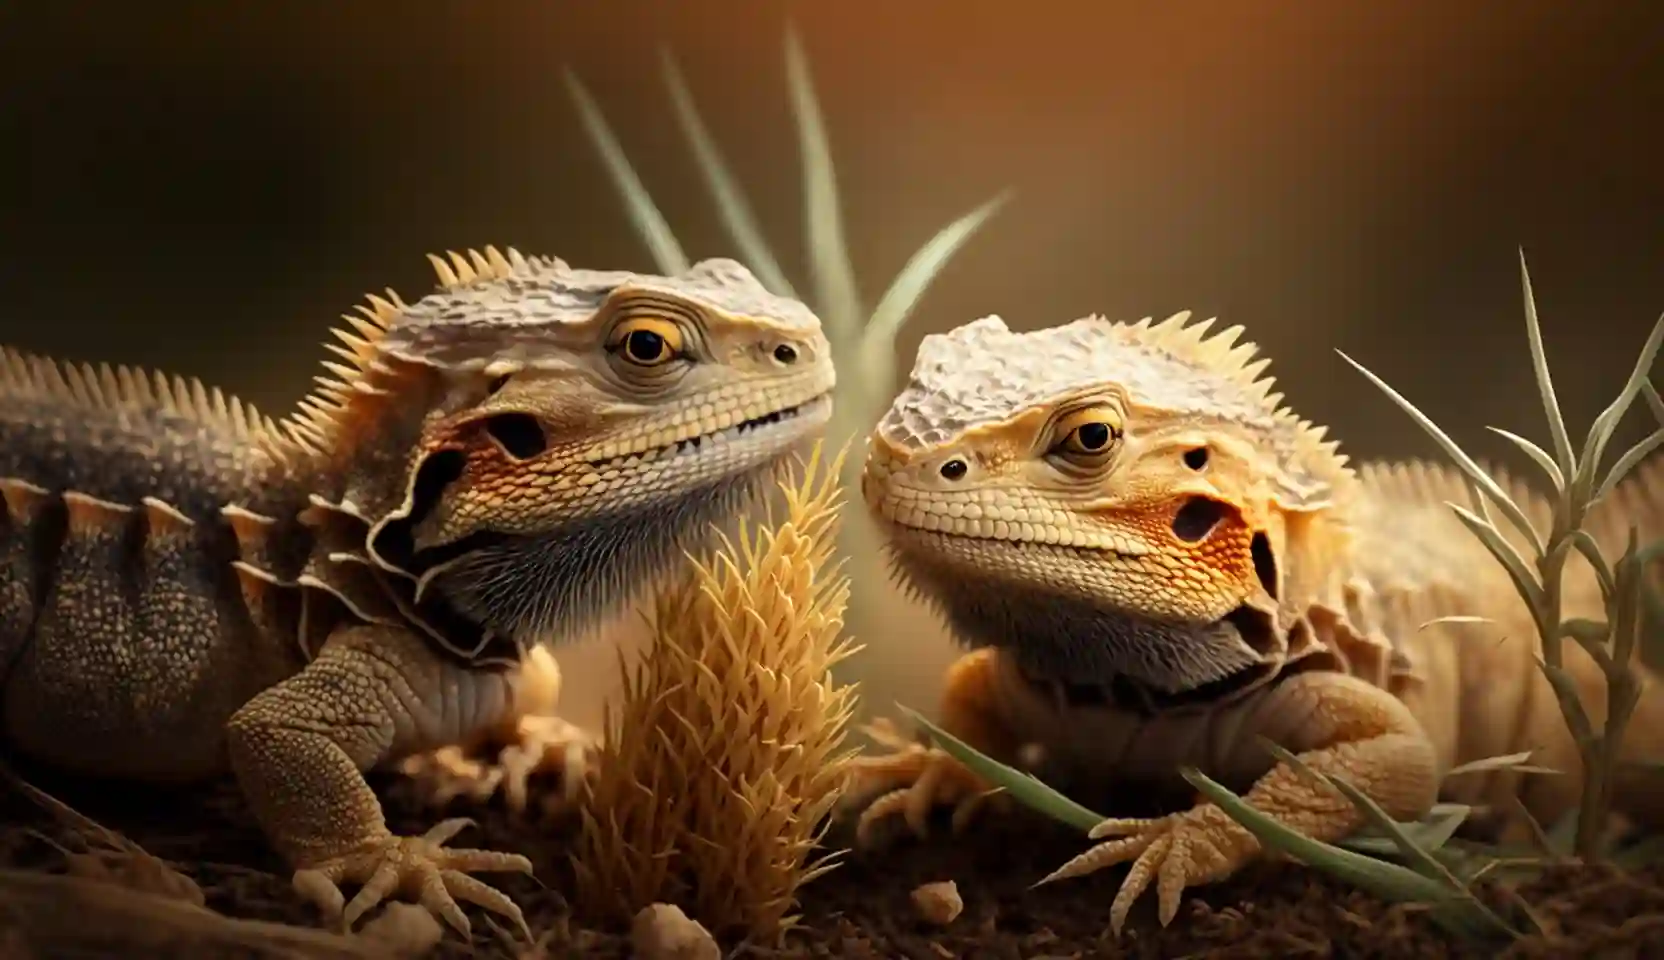 Can Bearded Dragons Eat Their Own Poop?